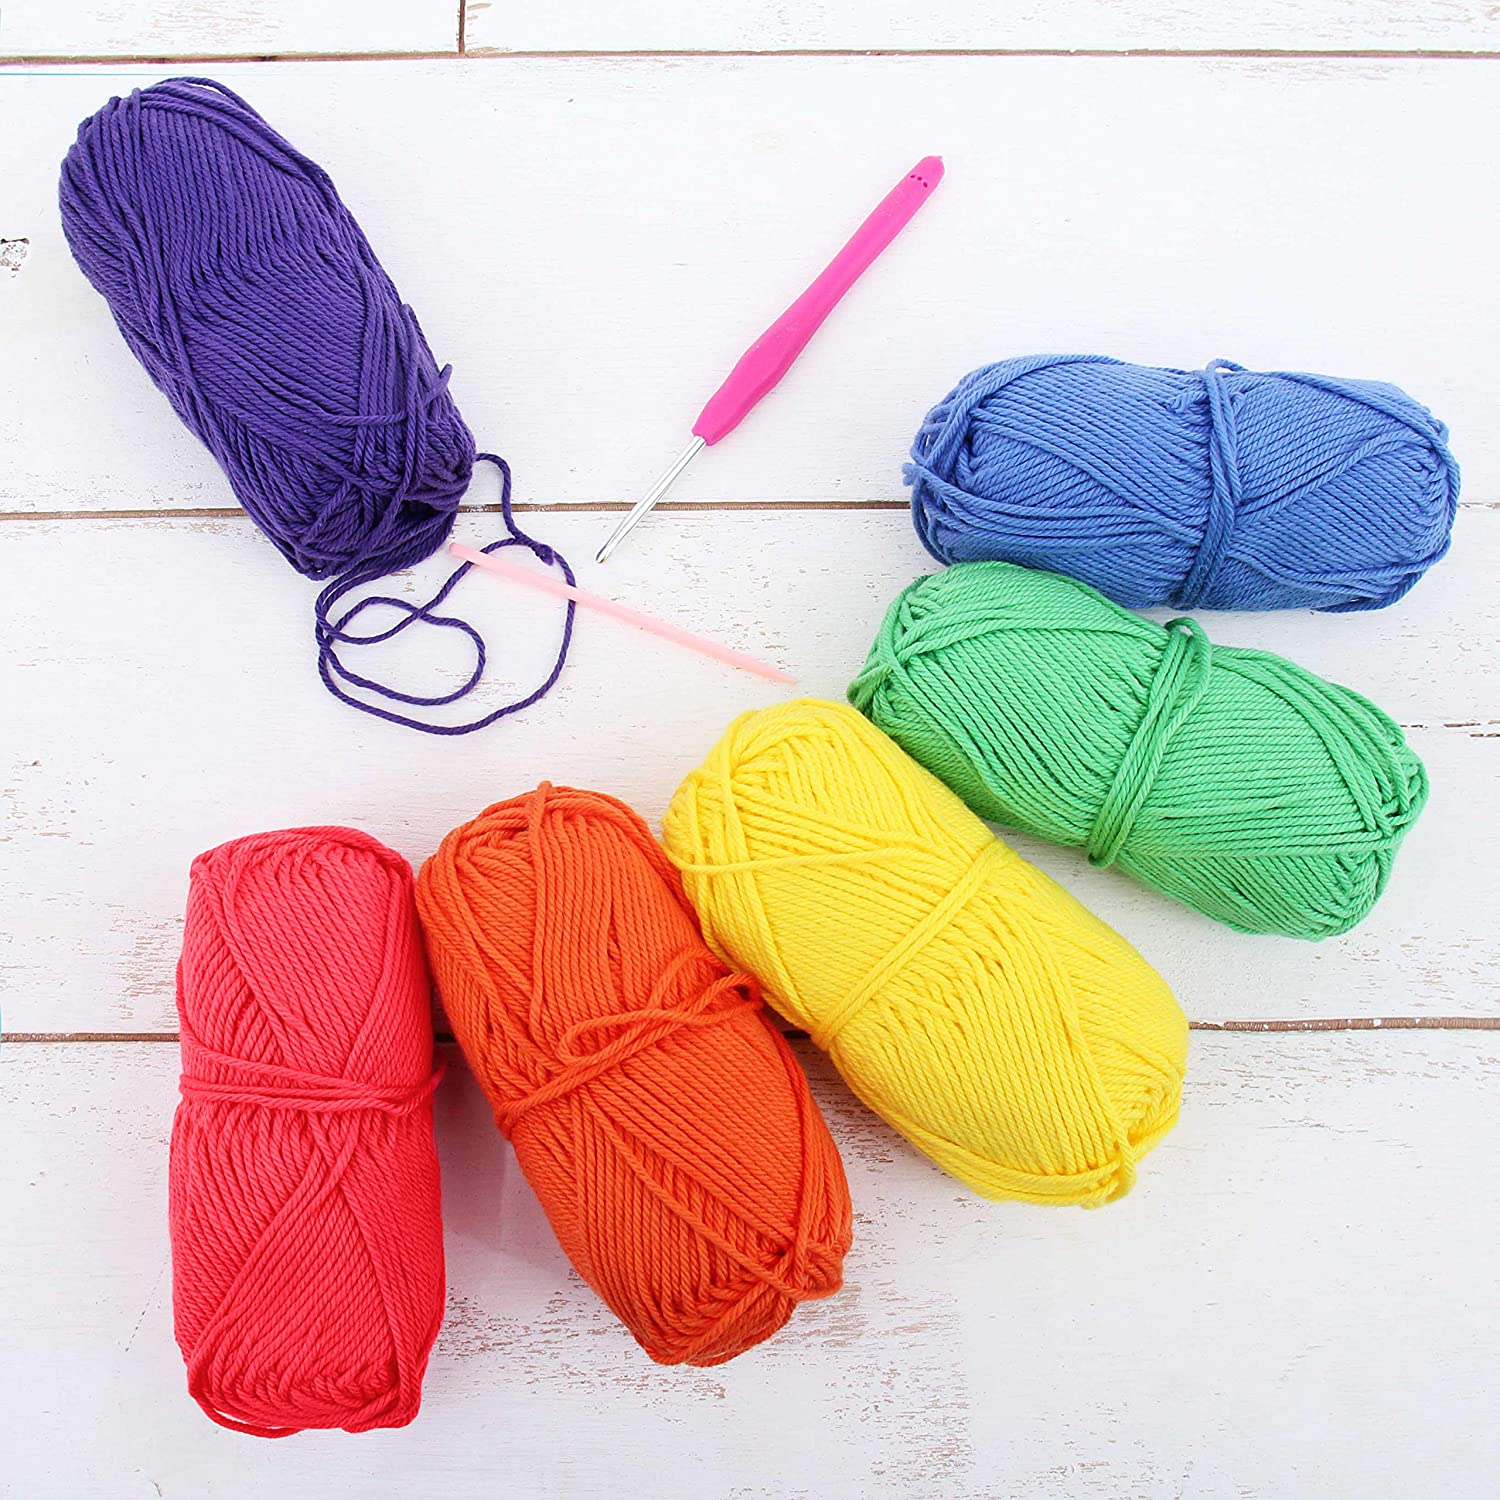 Read more about the article Best Crochet Yarn For Blankets – The 9 Most Important Things You Need To Know About Crochet Yarn